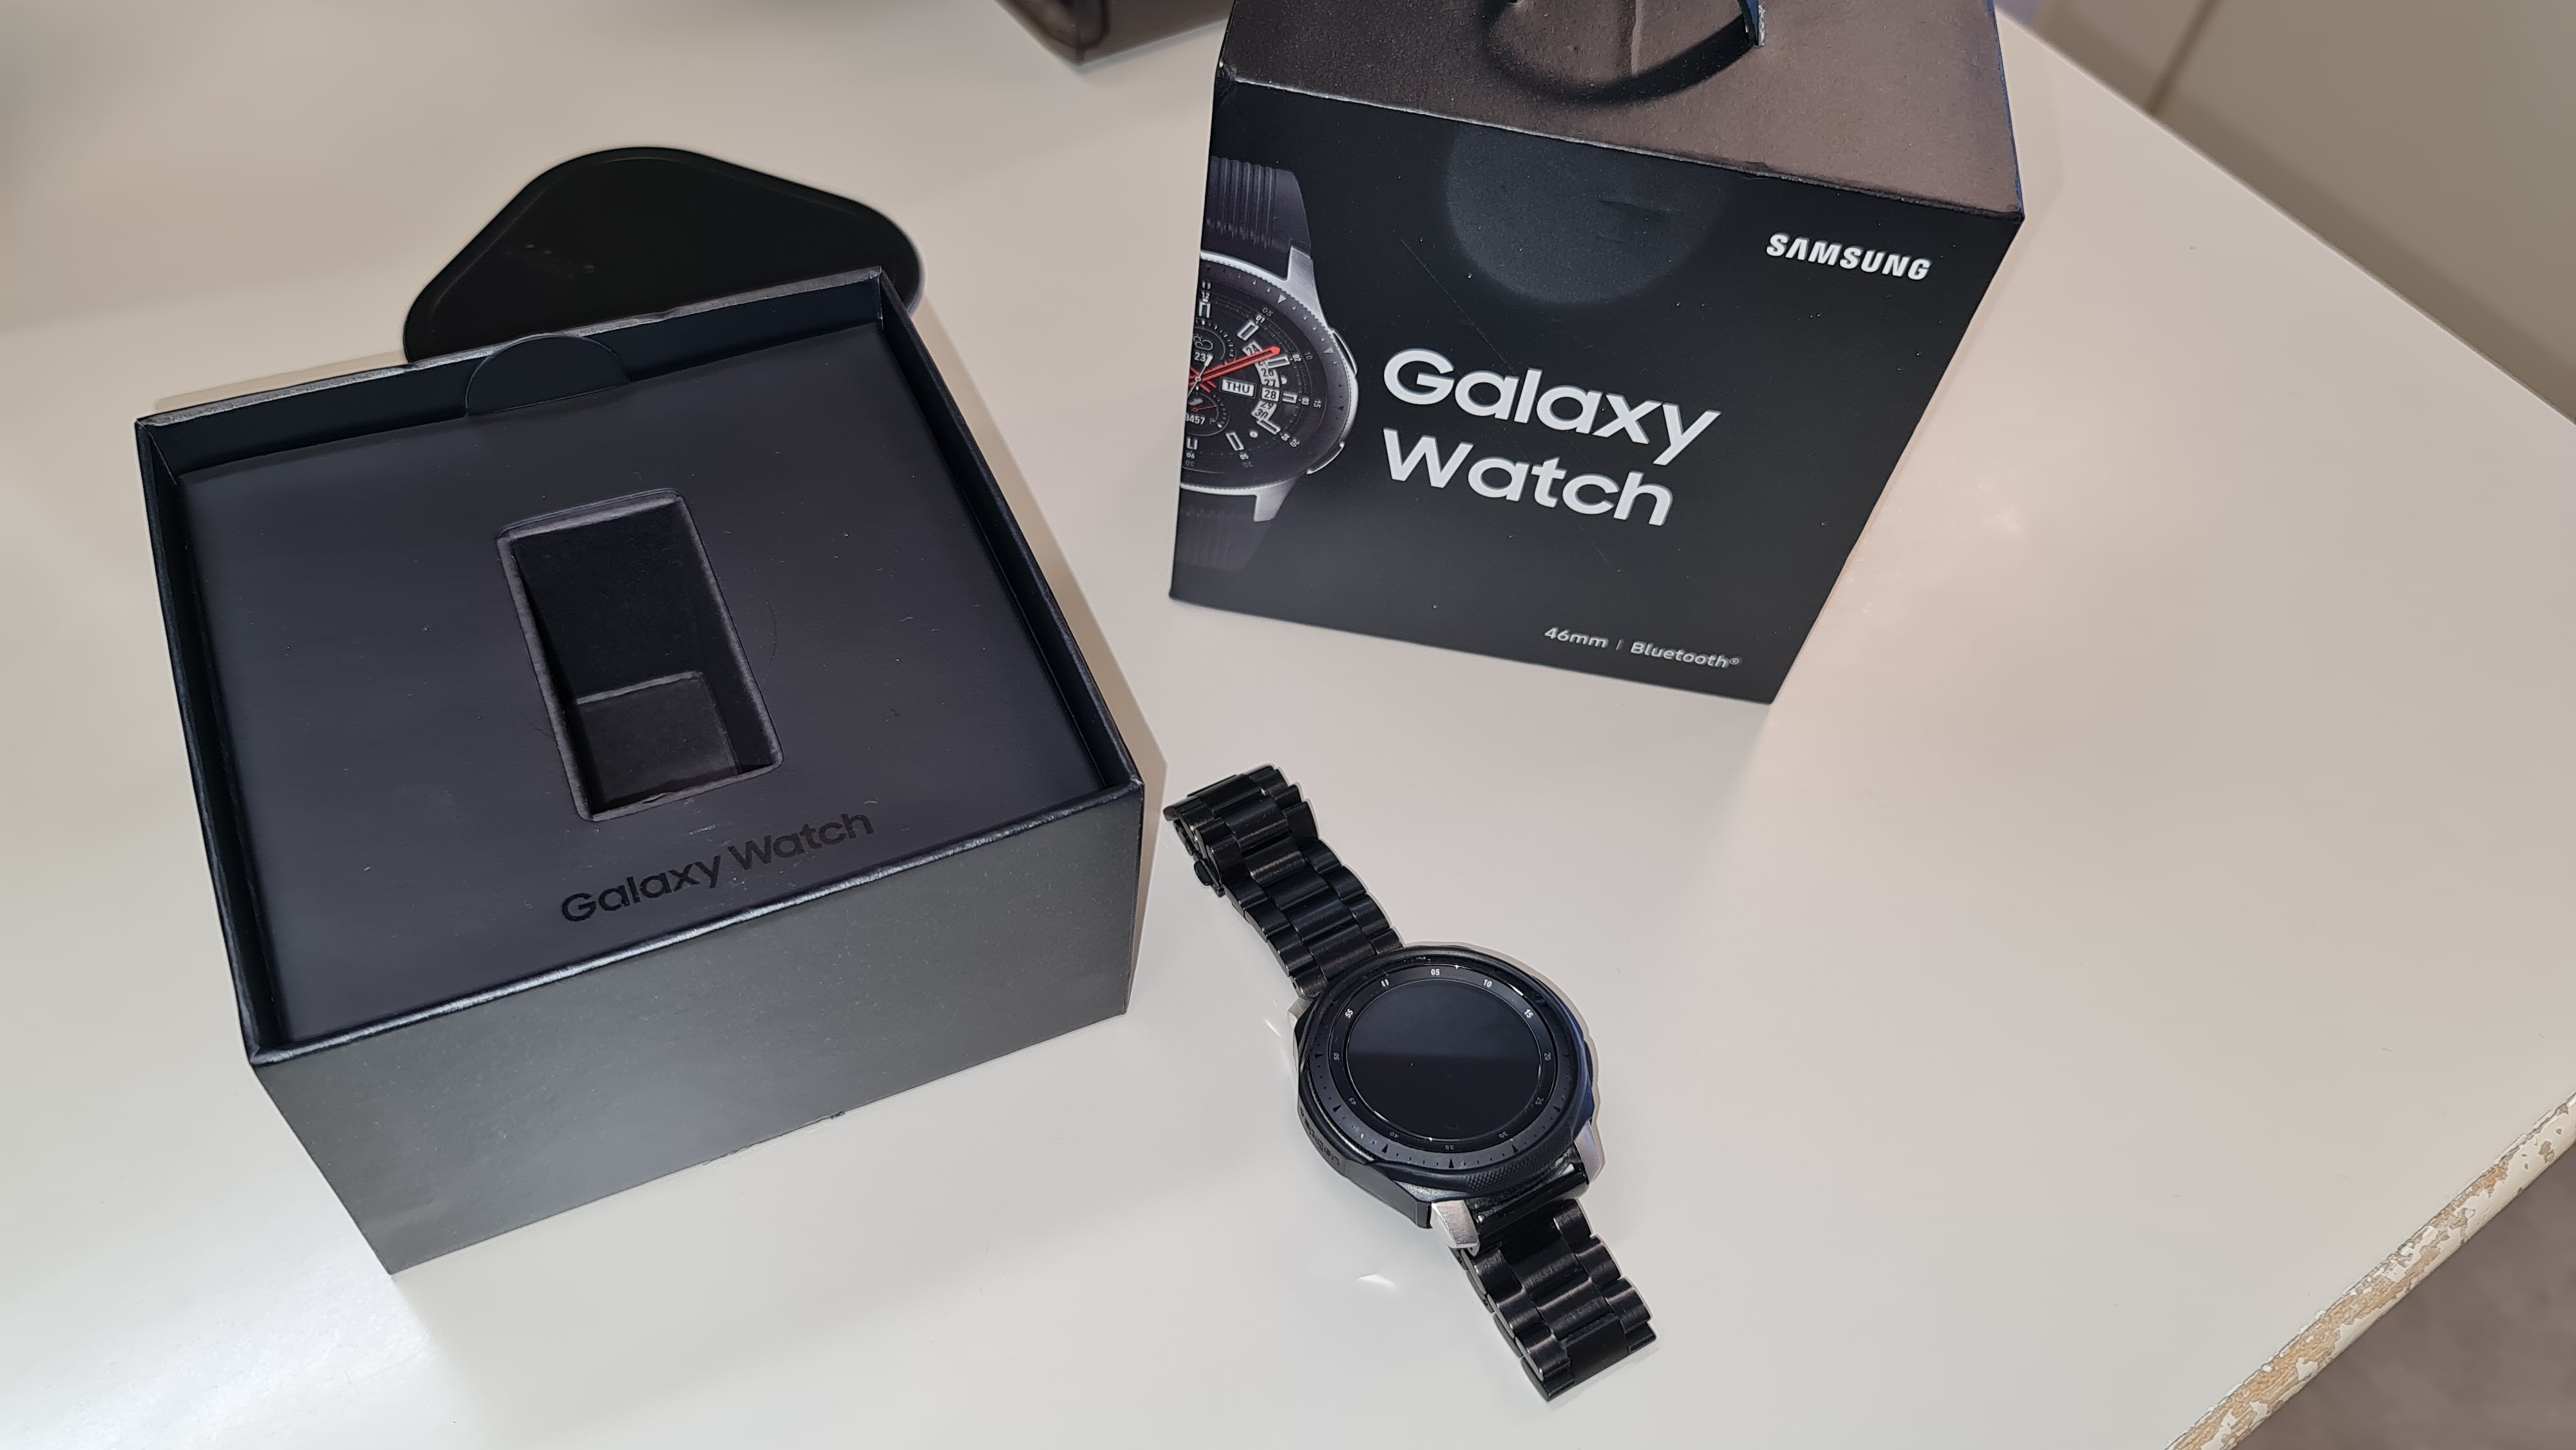 More information about "Samsung Galaxy Watch 46mm & Extras"